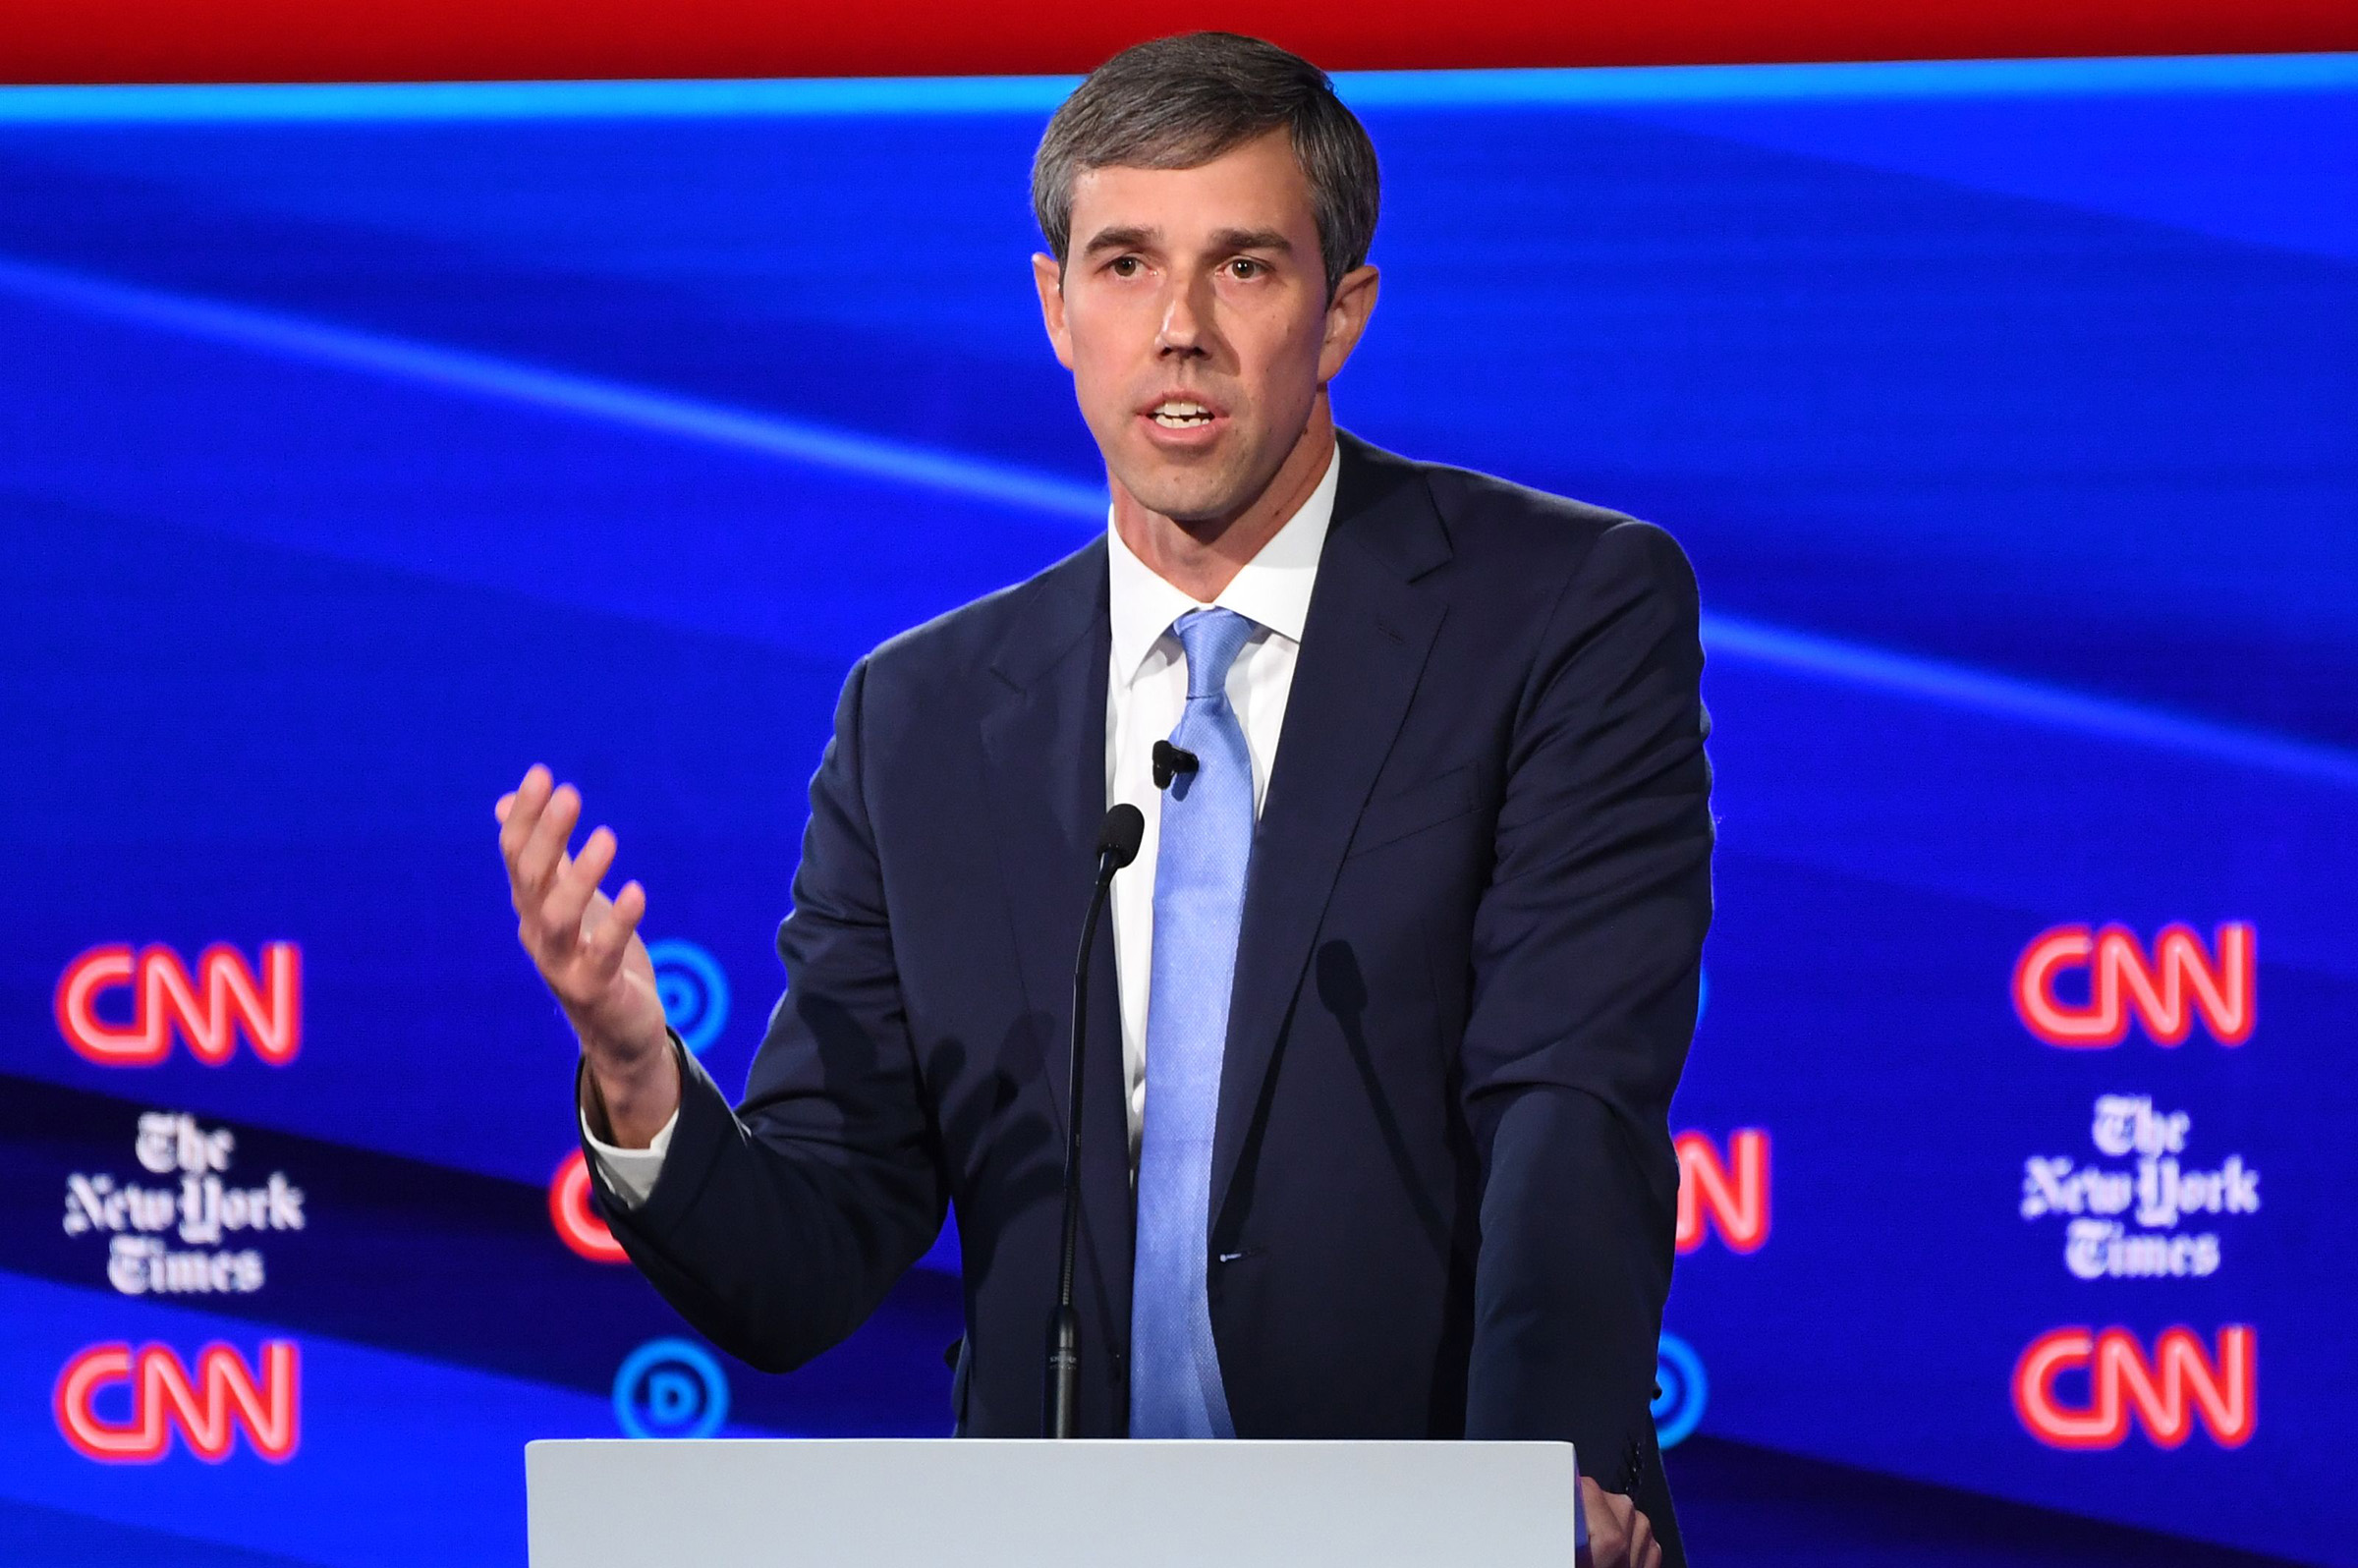 Democratic presidential hopeful former Texas representative Beto O'Rourke speaks during the fourth Democratic primary debate of the 2020 presidential campaign season in Westerville, Ohio on Oct. 15, 2019. (Saul Loeb—AFP via Getty Images)